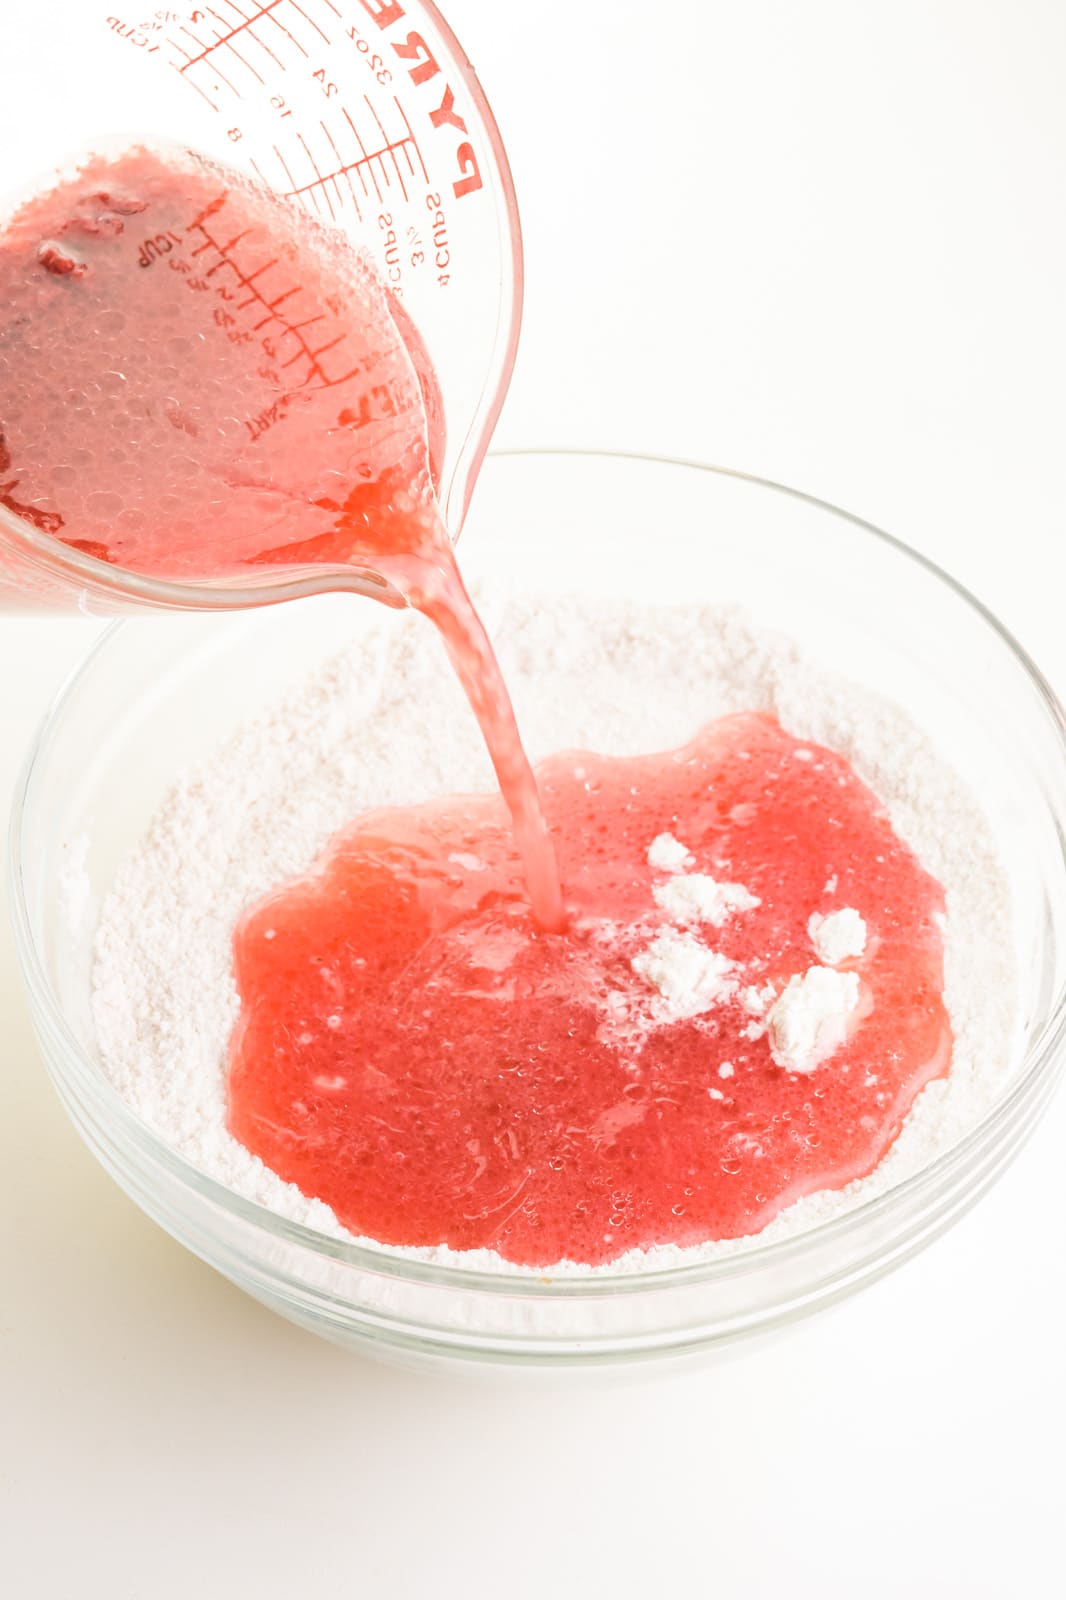 A red liquid is being poured into a glass bowl with a flour mixture. This to make batter for a strawberry cake.